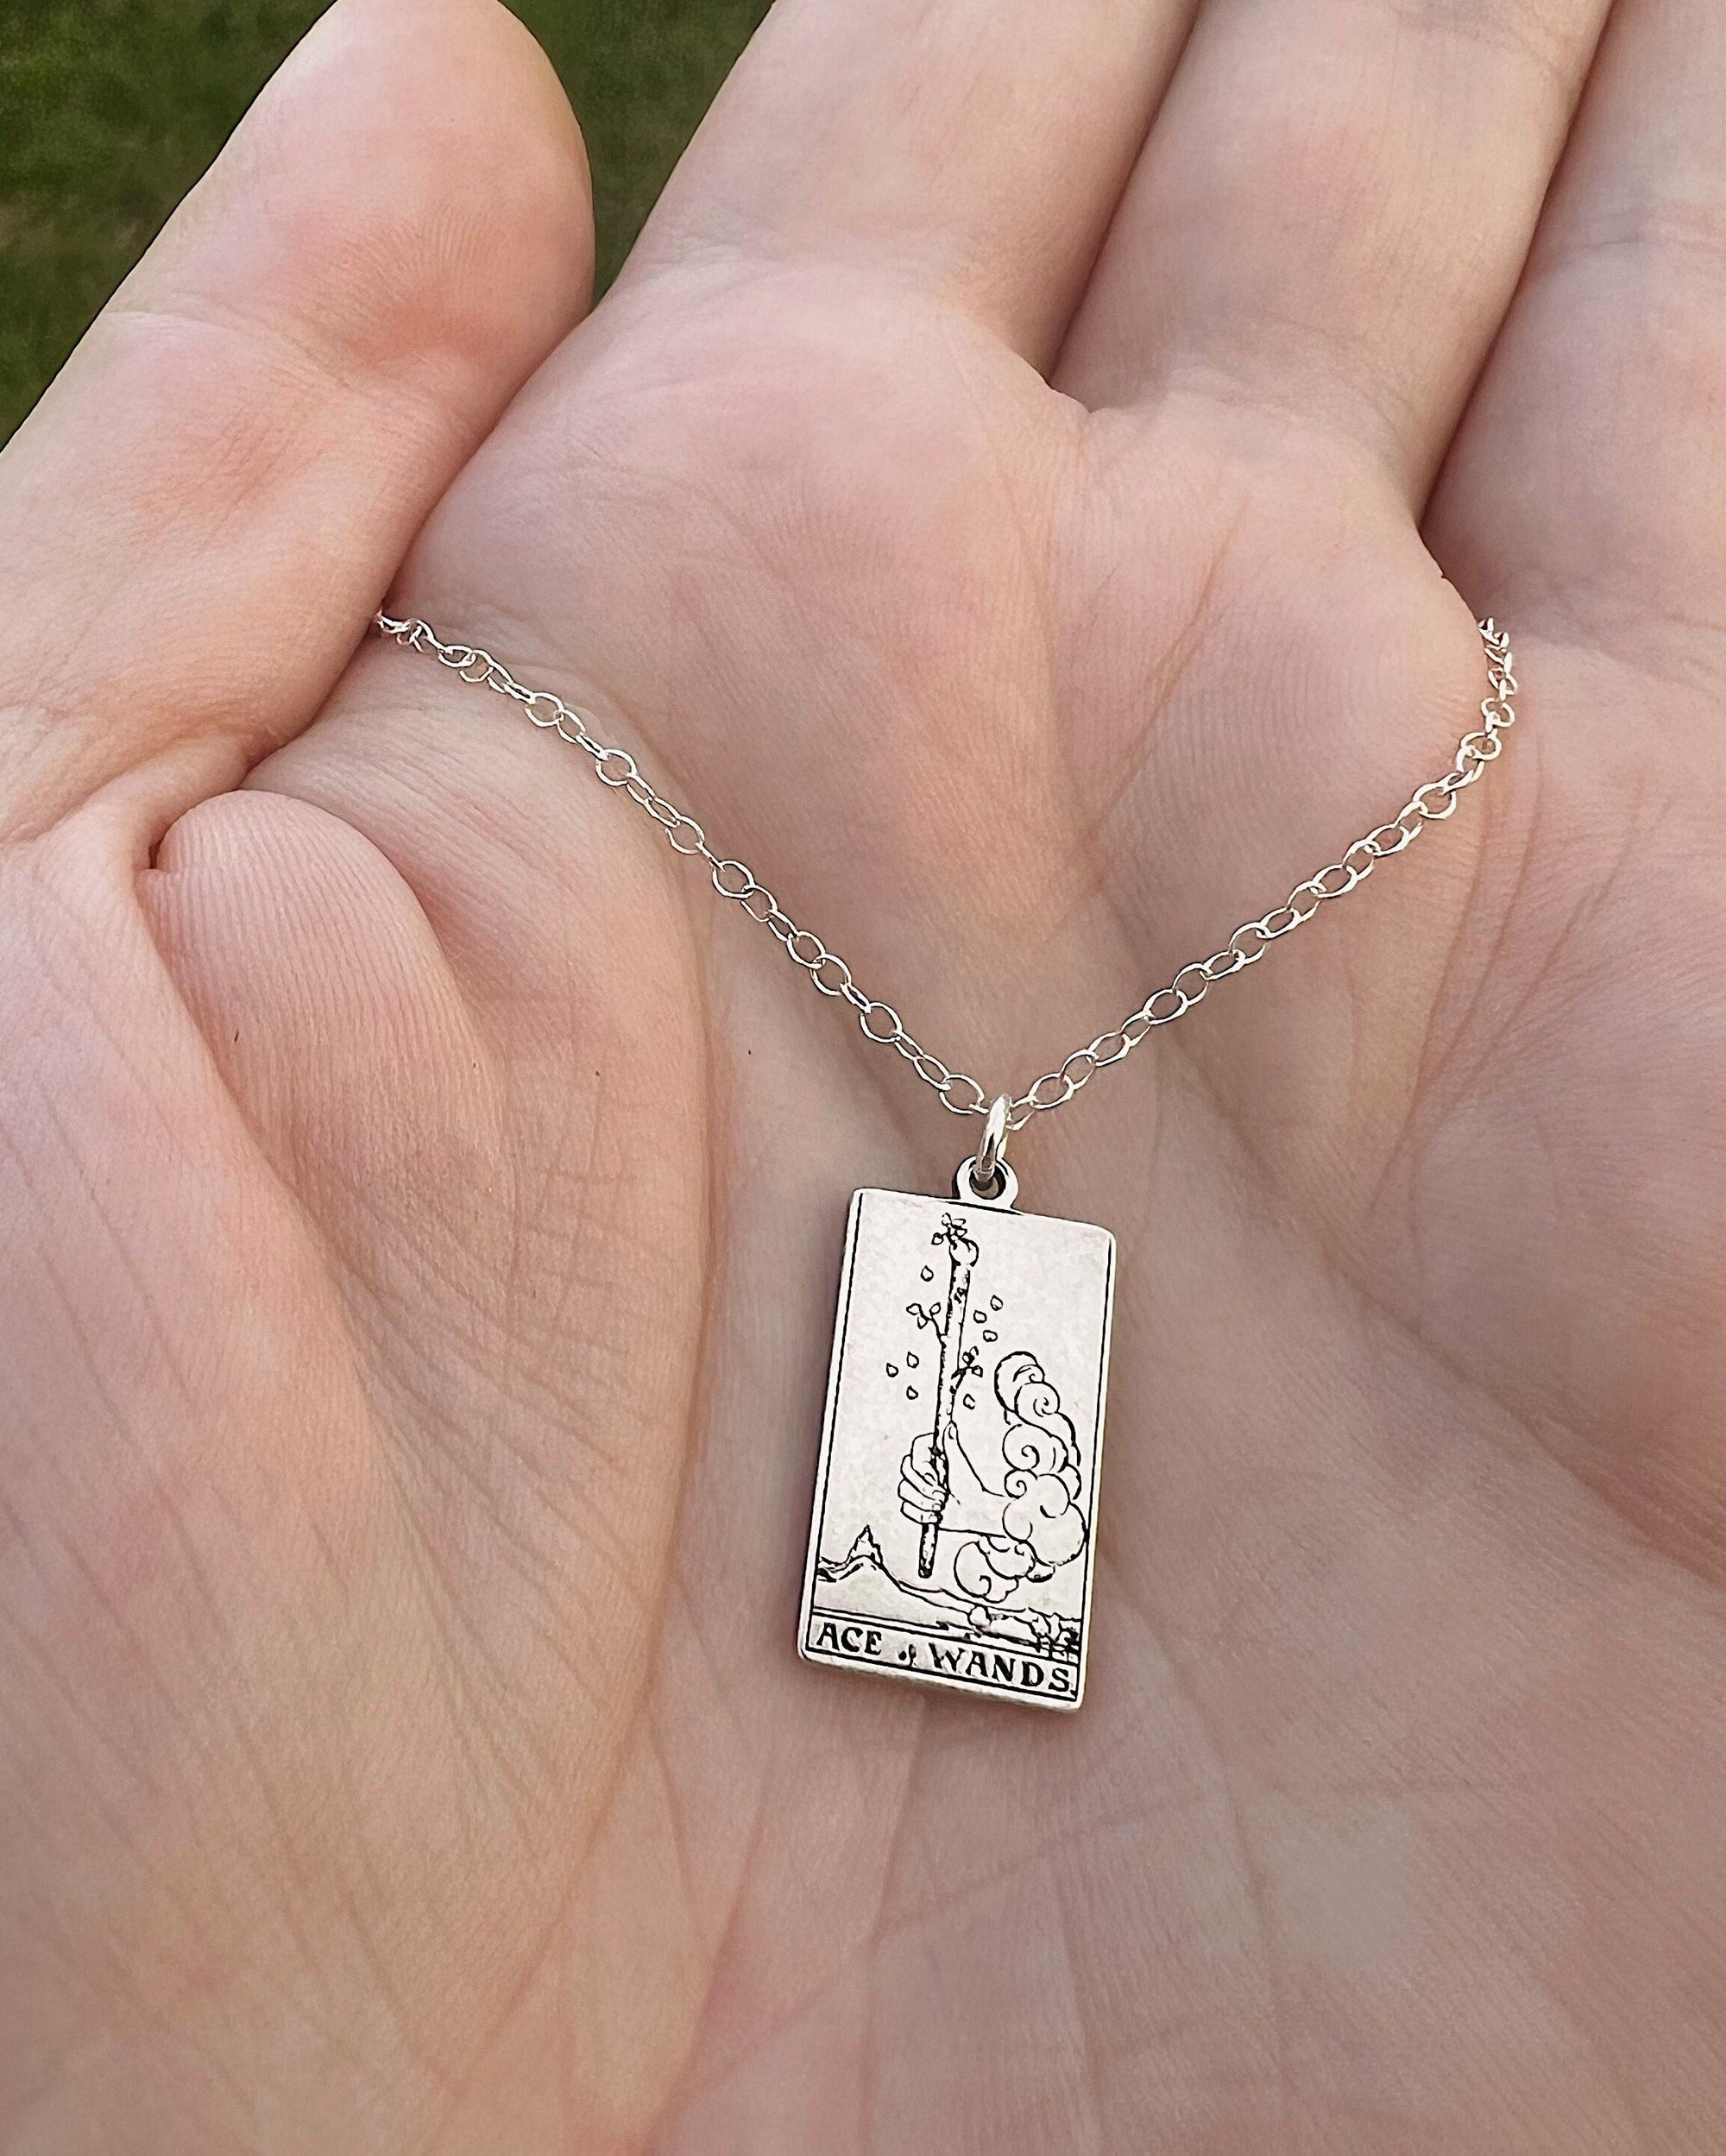 Ace of Wands Tarot Card Necklace - Sterling Silver